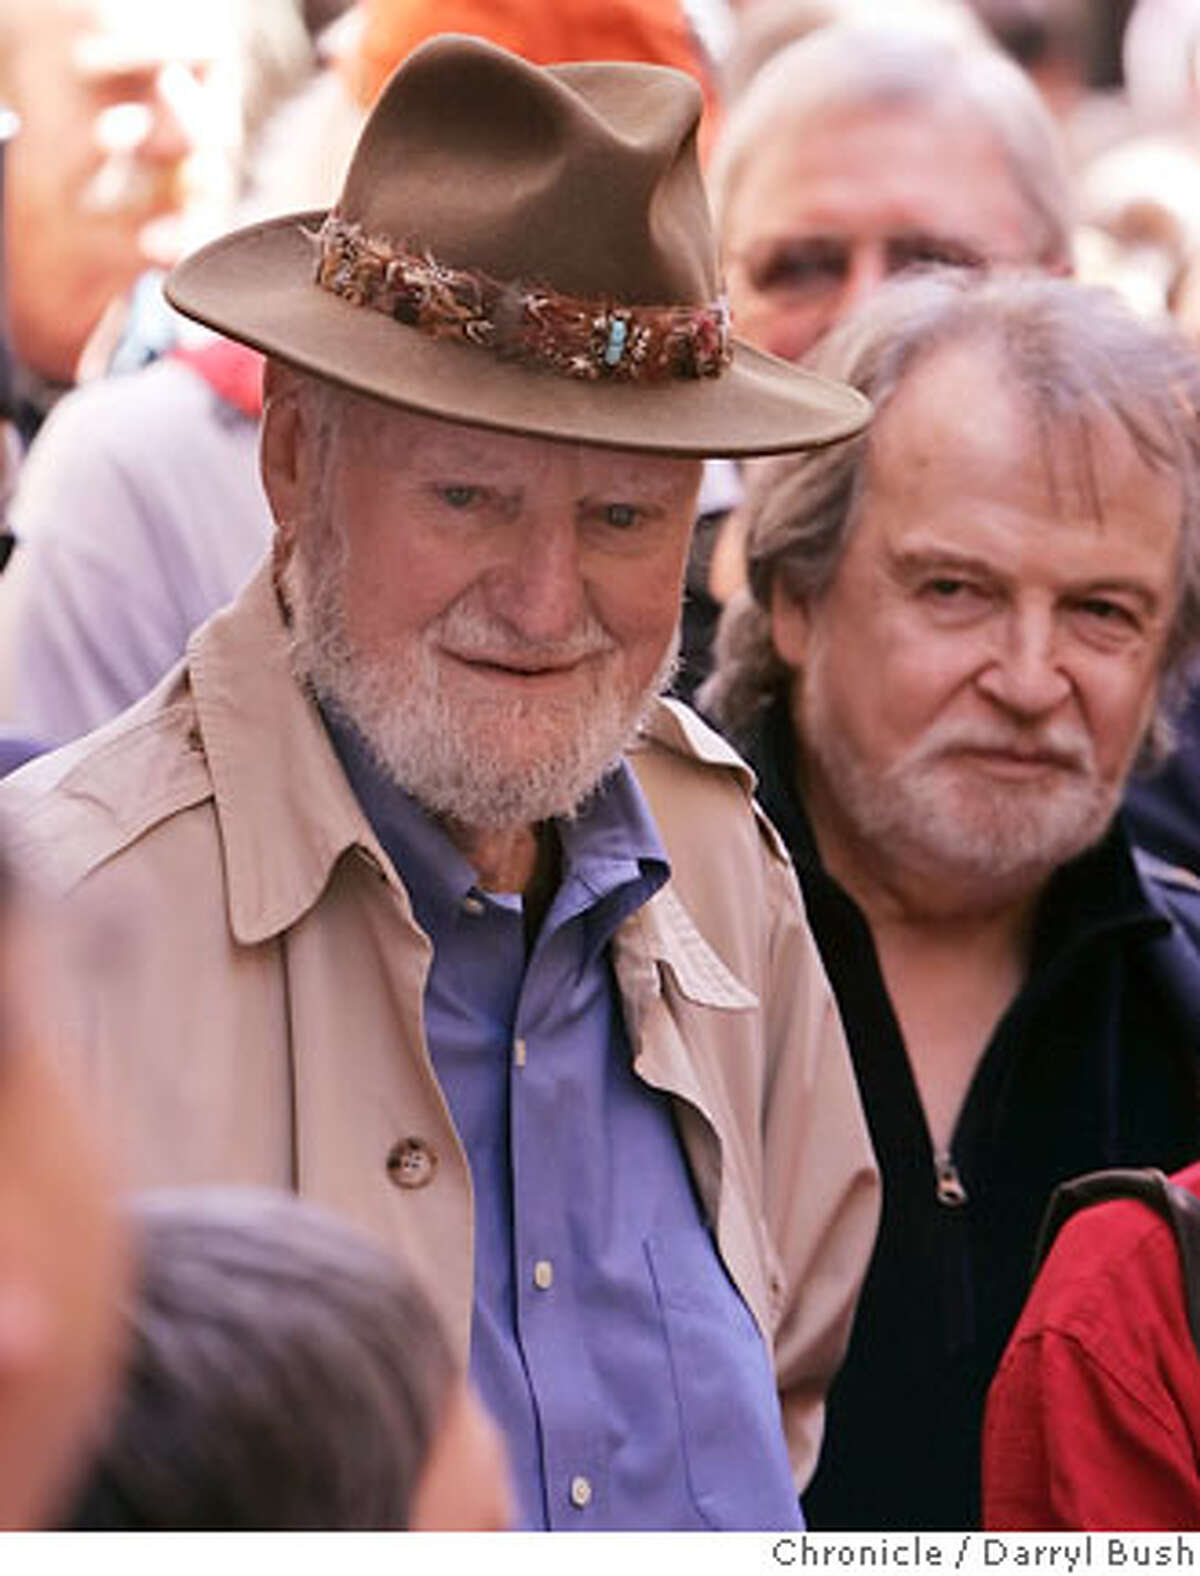 Poet Lawrence Ferlinghetti, owner of City Lights Bookstore, with friend, conductor George Cleve of Berkeley, back right, talks to many fans of his poetry as he attends with a crowd of hundreds at the Jack Kerouac Alley Dedication for the newly restored Jack Kerouac Alley between Grant and Coumbus in North Beach, which was attended by community leaders and local residents from North Beach and Chinatown and included entertainment and festivities from 12:00 to 4:00 p.m. in San Francisco, CA, on Saturday, March, 31, 2007. photo taken: 3/31/07 Darryl Bush / The Chronicle ** Lawrence Ferlinghetti (cq)